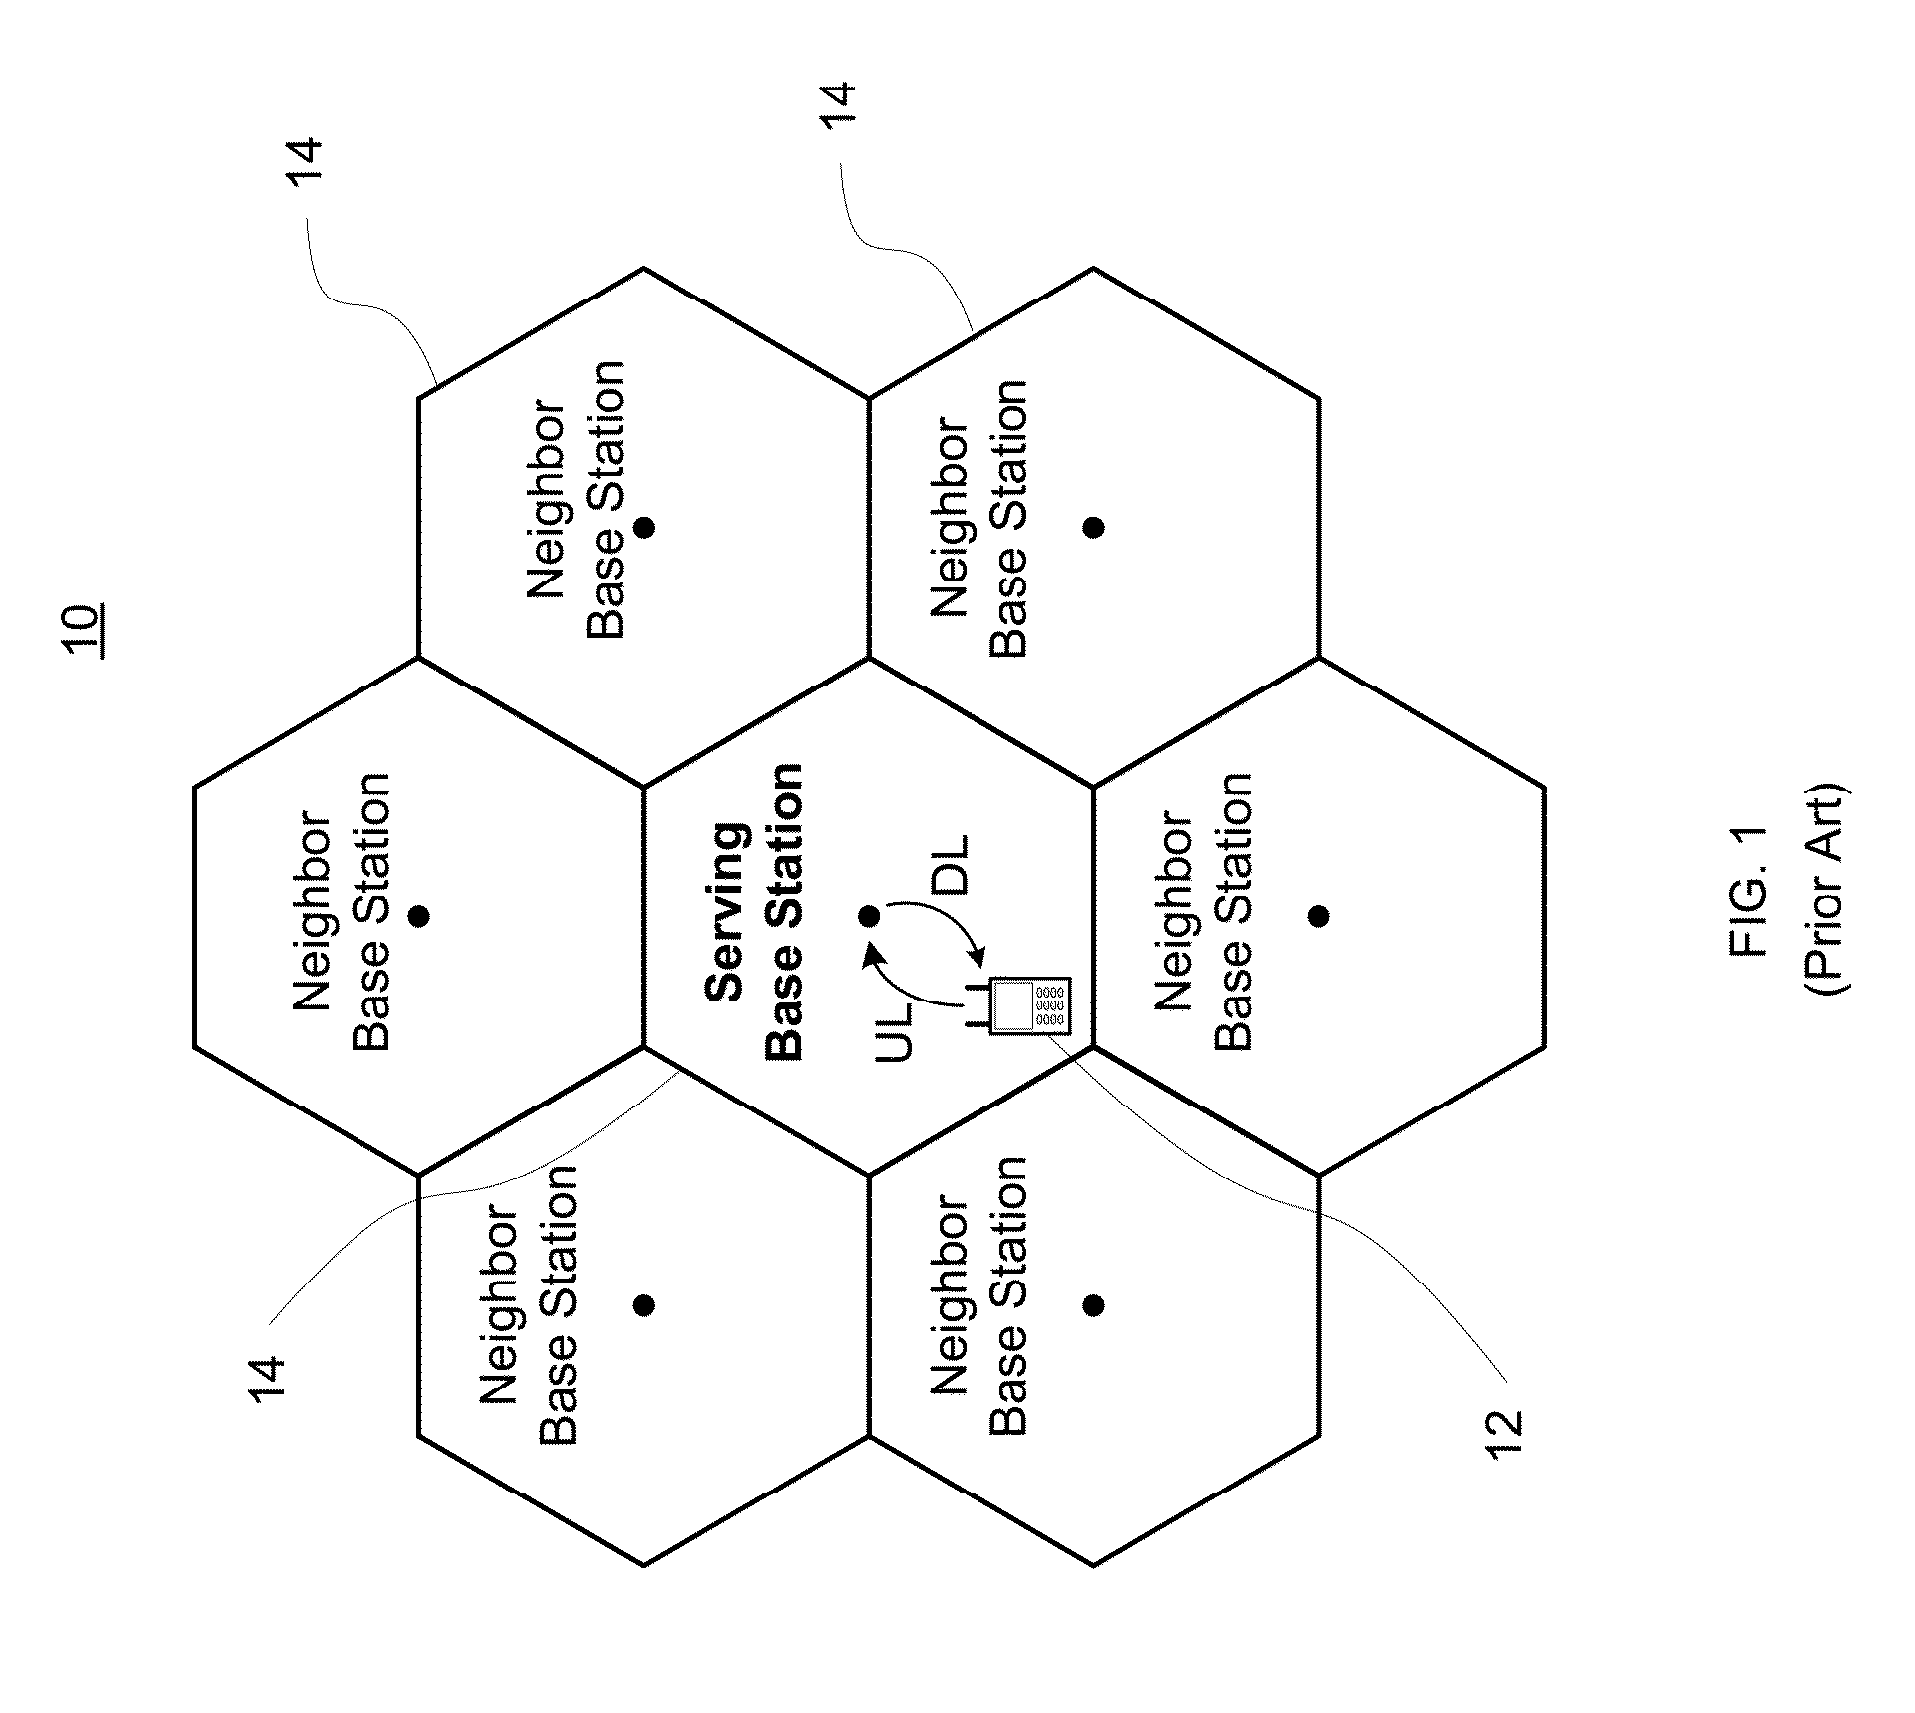 Method and apparatus for detecting inconsistent control information in wireless communication systems